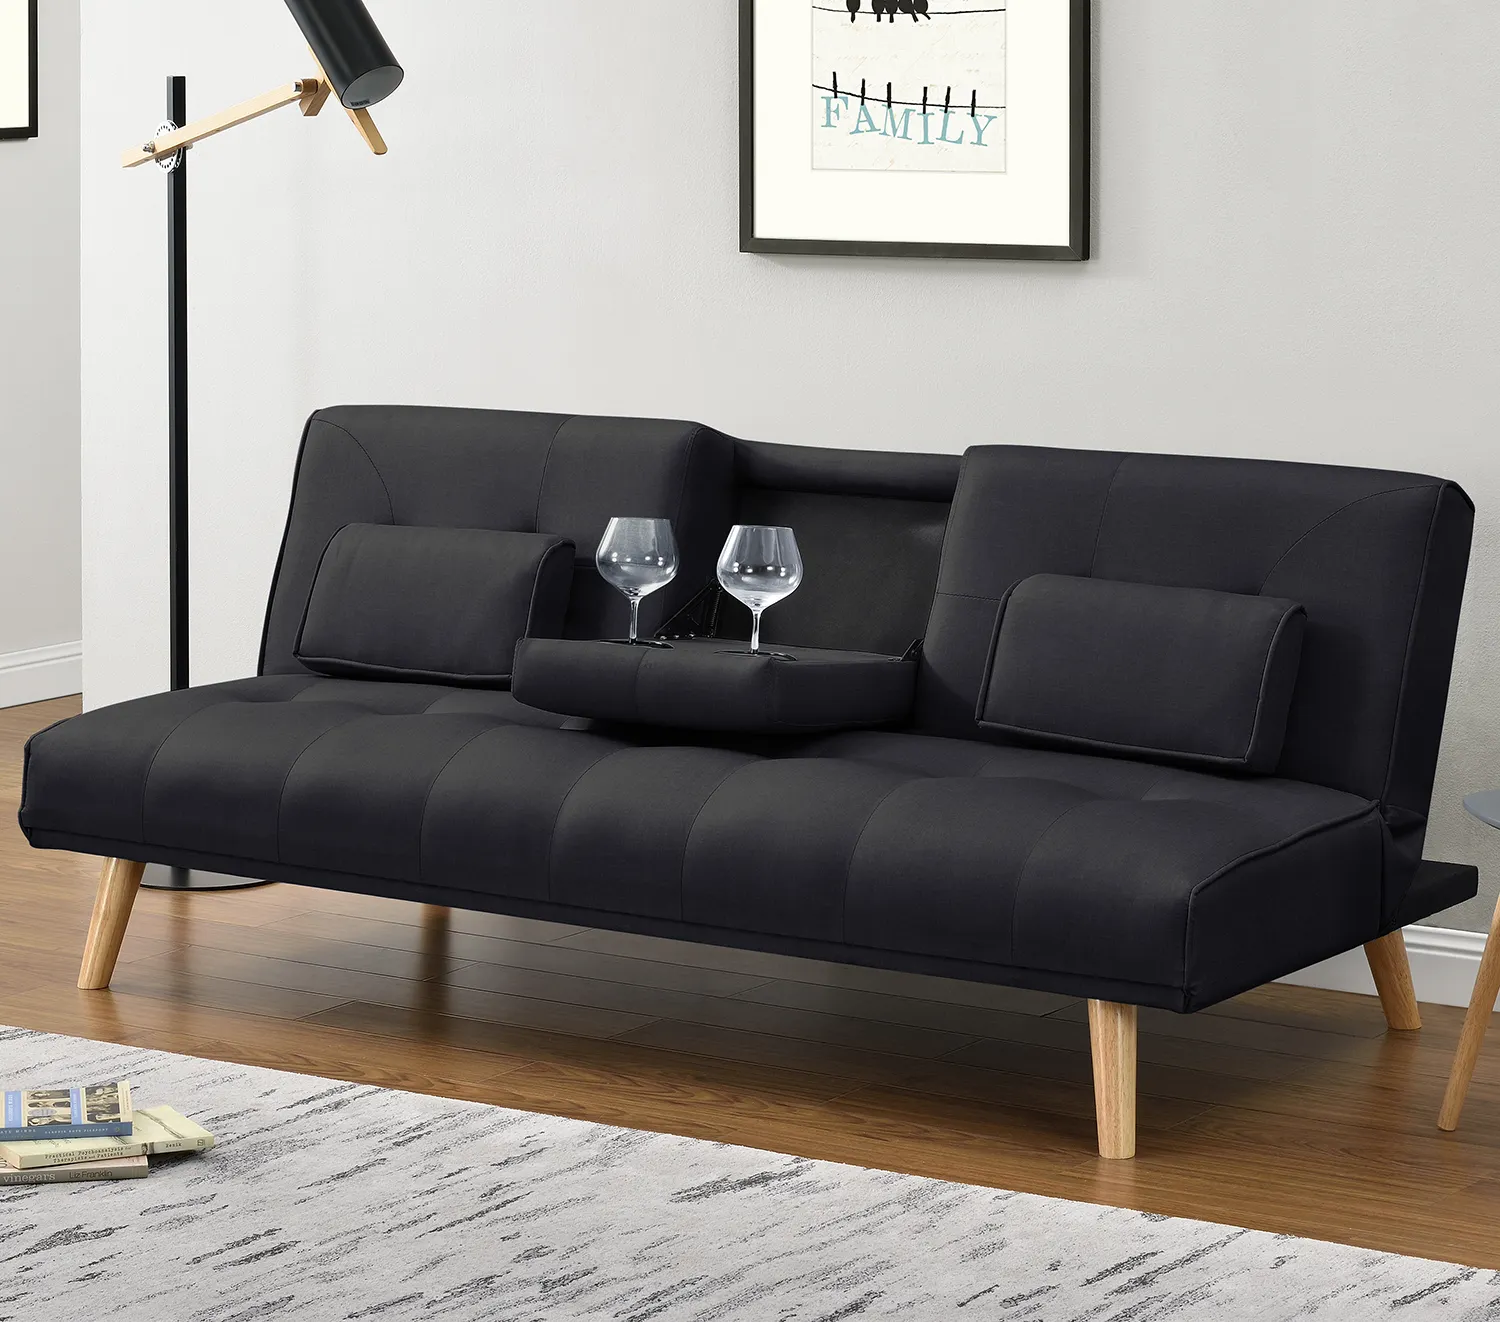 Cheap leather sofa bed with coffee table and cup holder